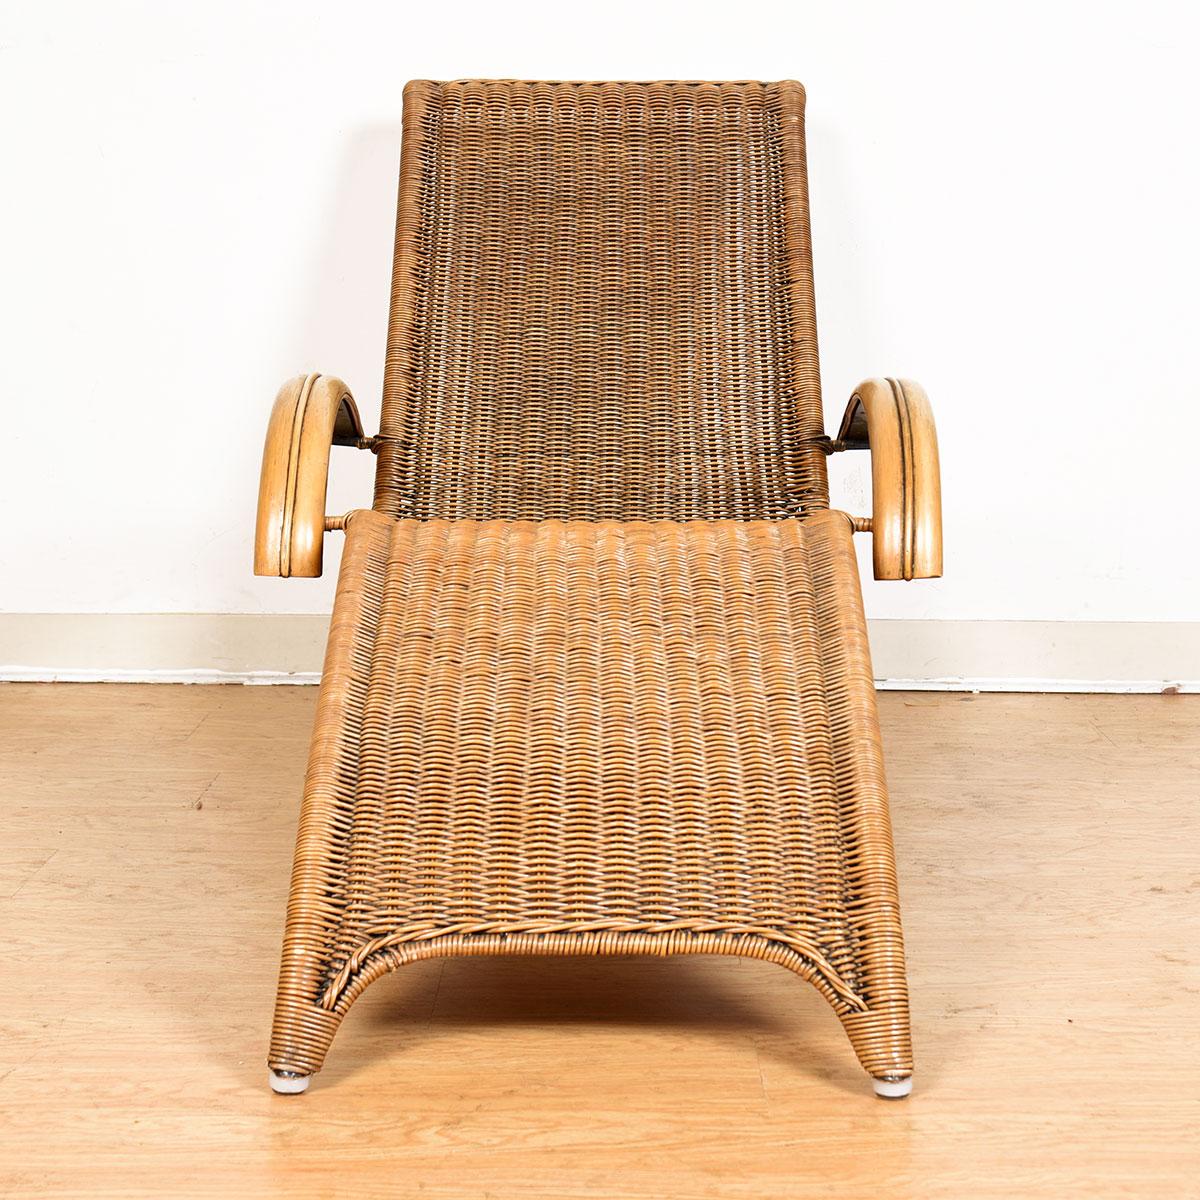 20th Century Midcentury Woven Rattan Chaise Lounge For Sale